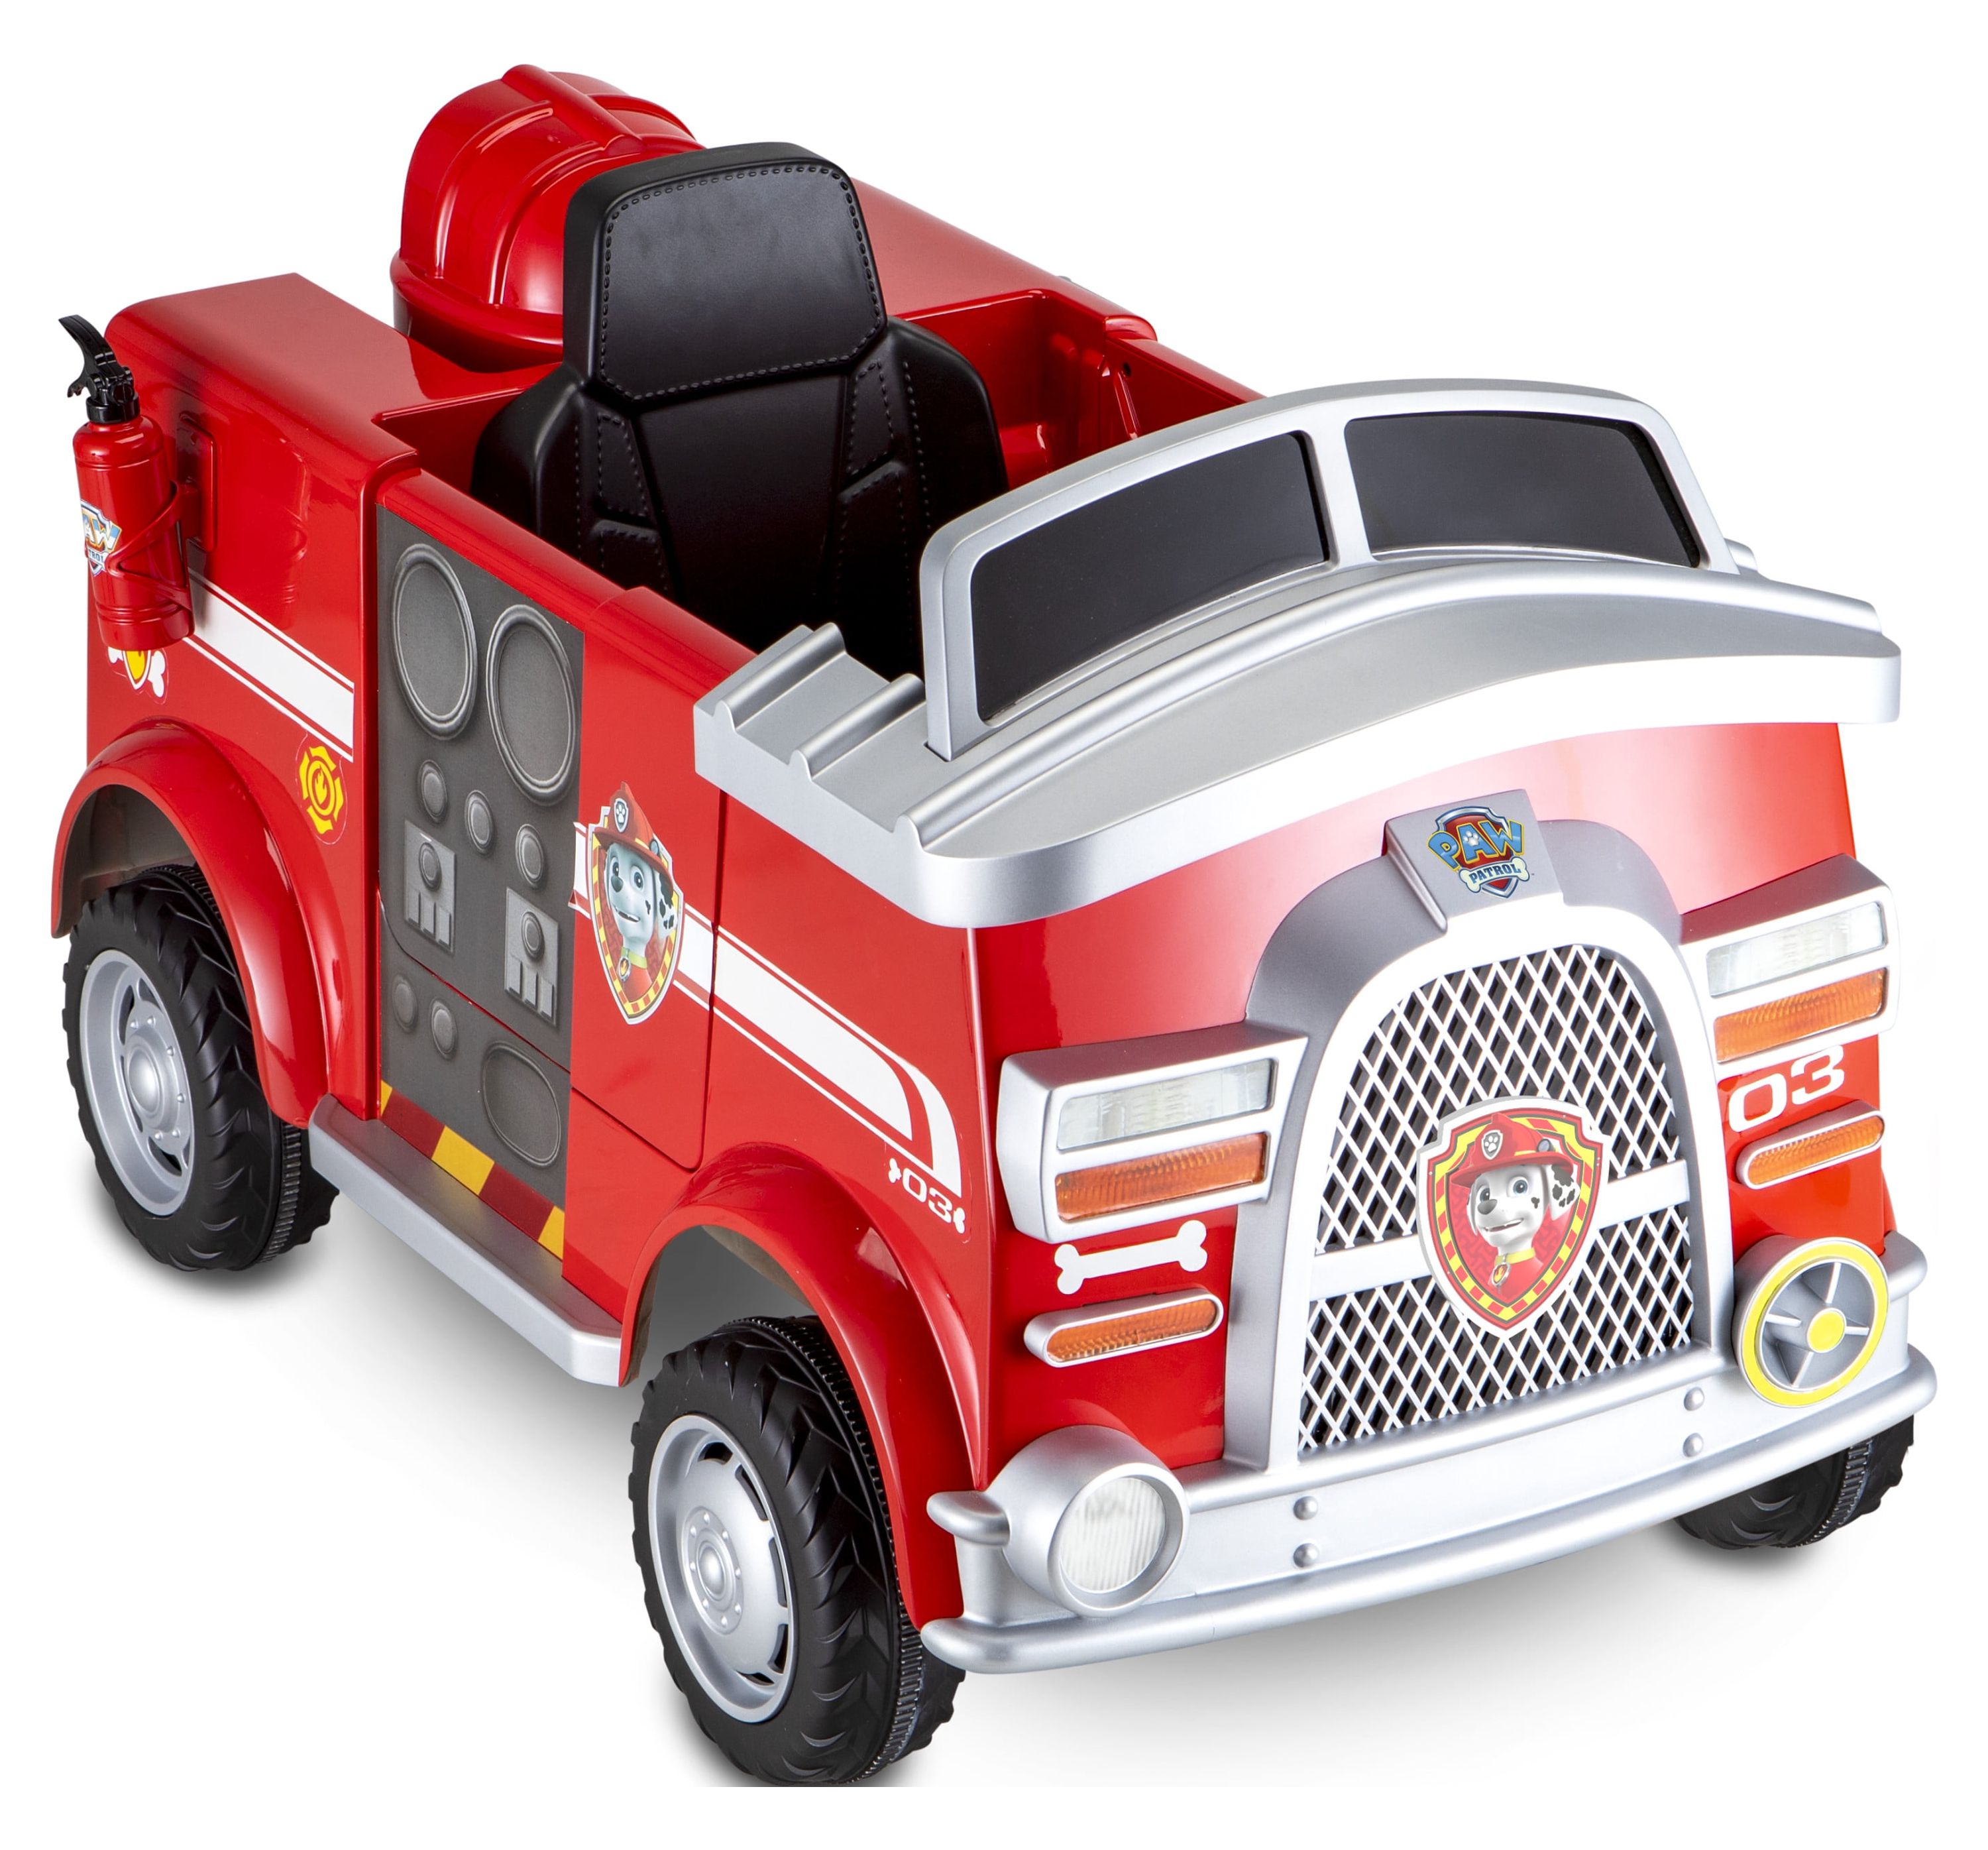 Nickelodeon's PAW Patrol: Marshall Rescue Fire Truck, Ride-On Toy by Kid Trax - image 4 of 10